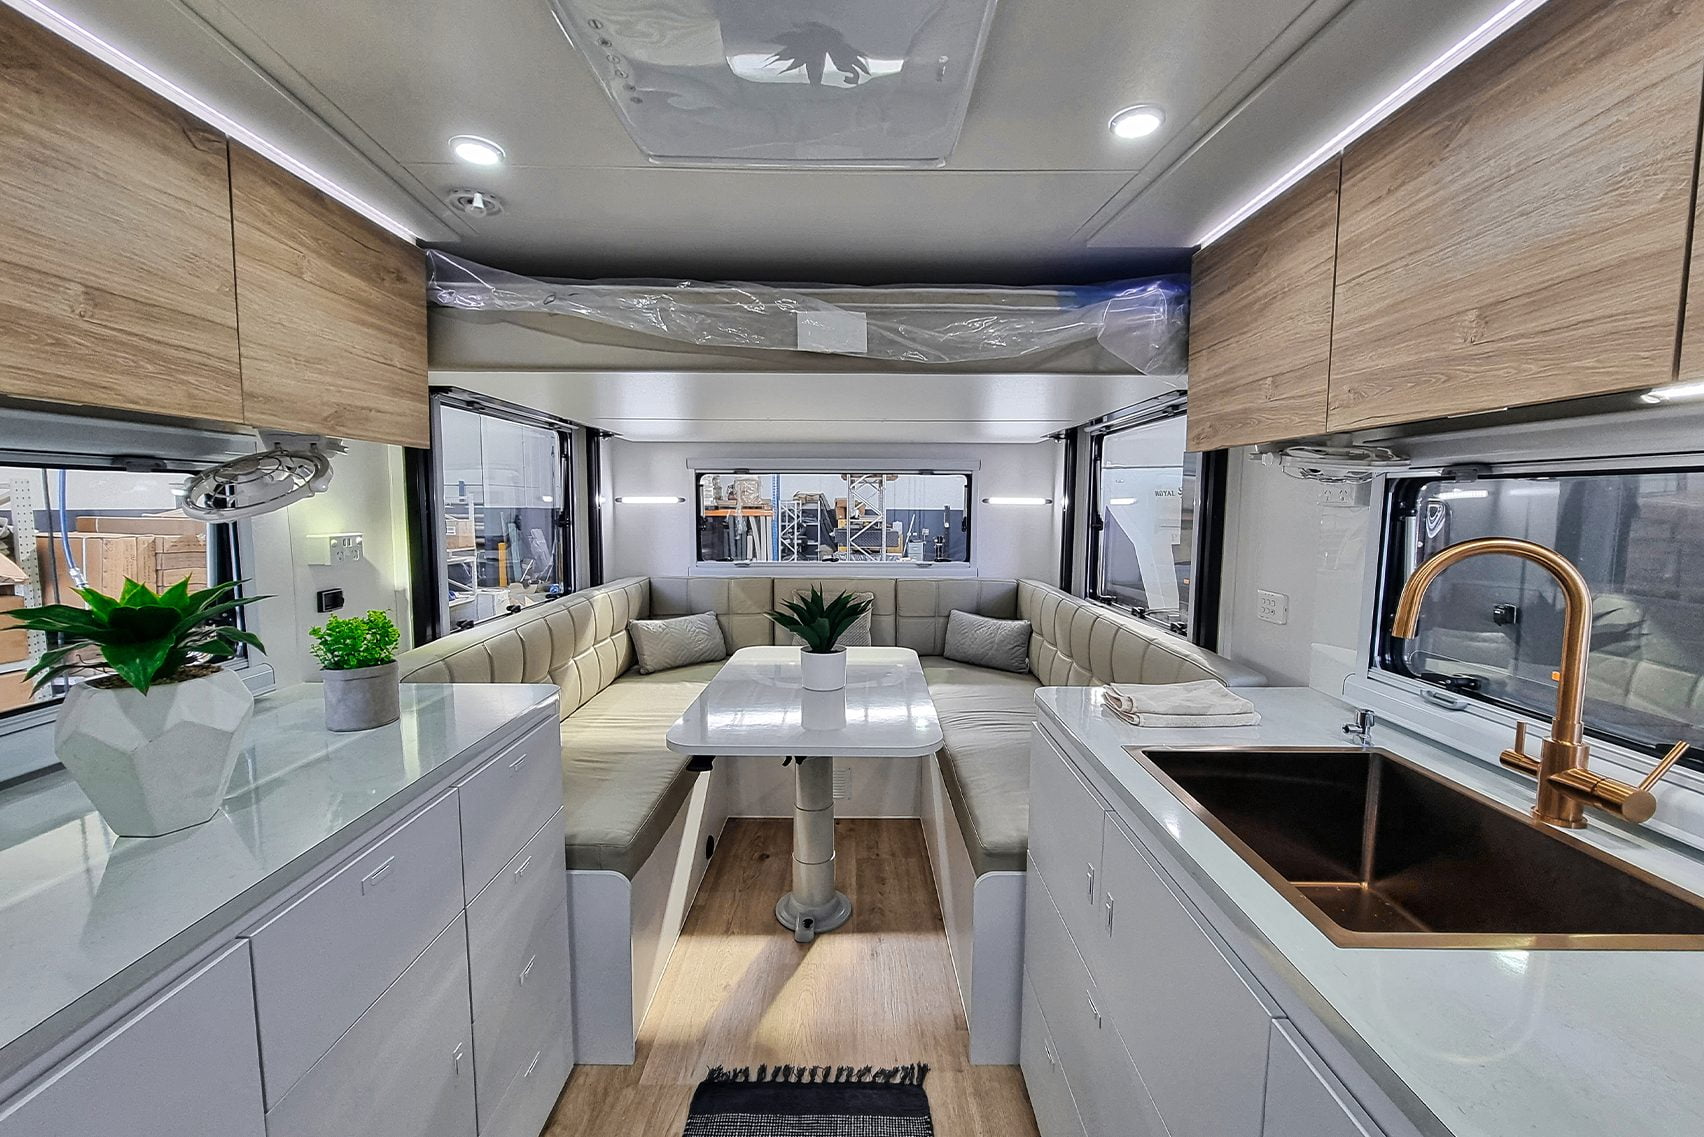 Elegant Royal Flair Aussiemate caravan with inviting kitchen seating, luminous interior, and integrated storage compartments